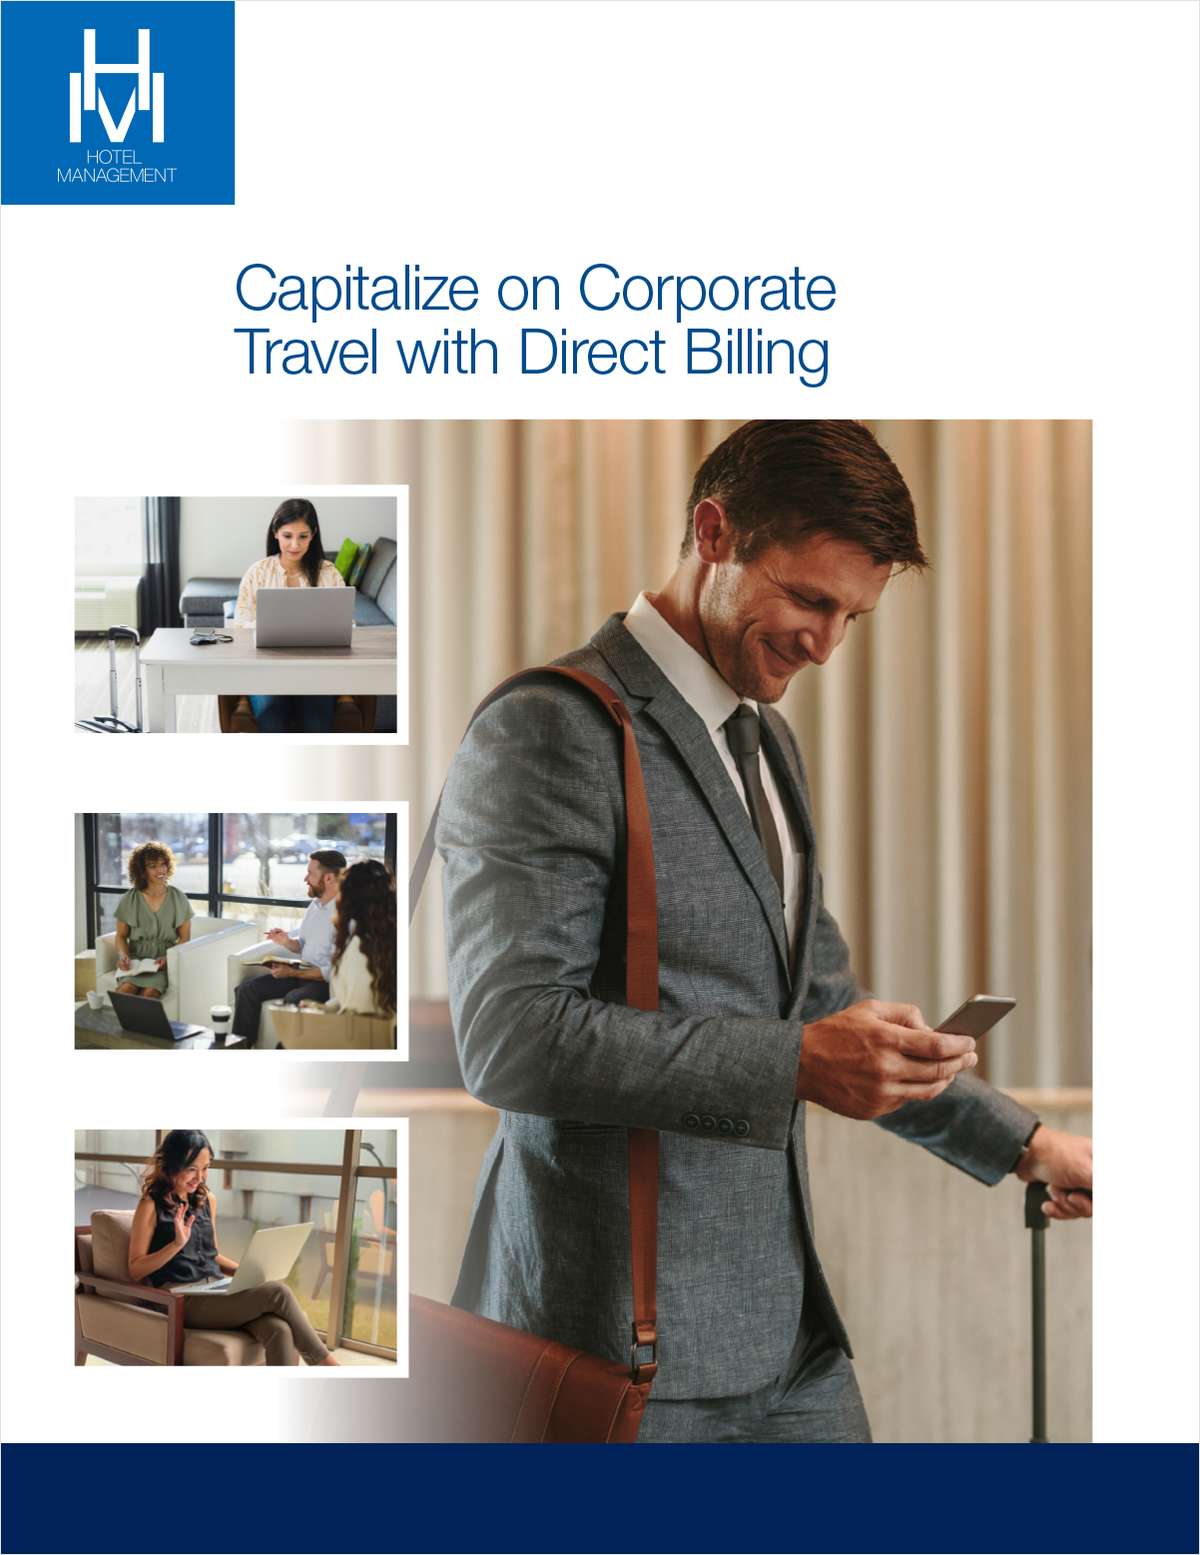 Capitalize on Corporate Travel with Direct Billing